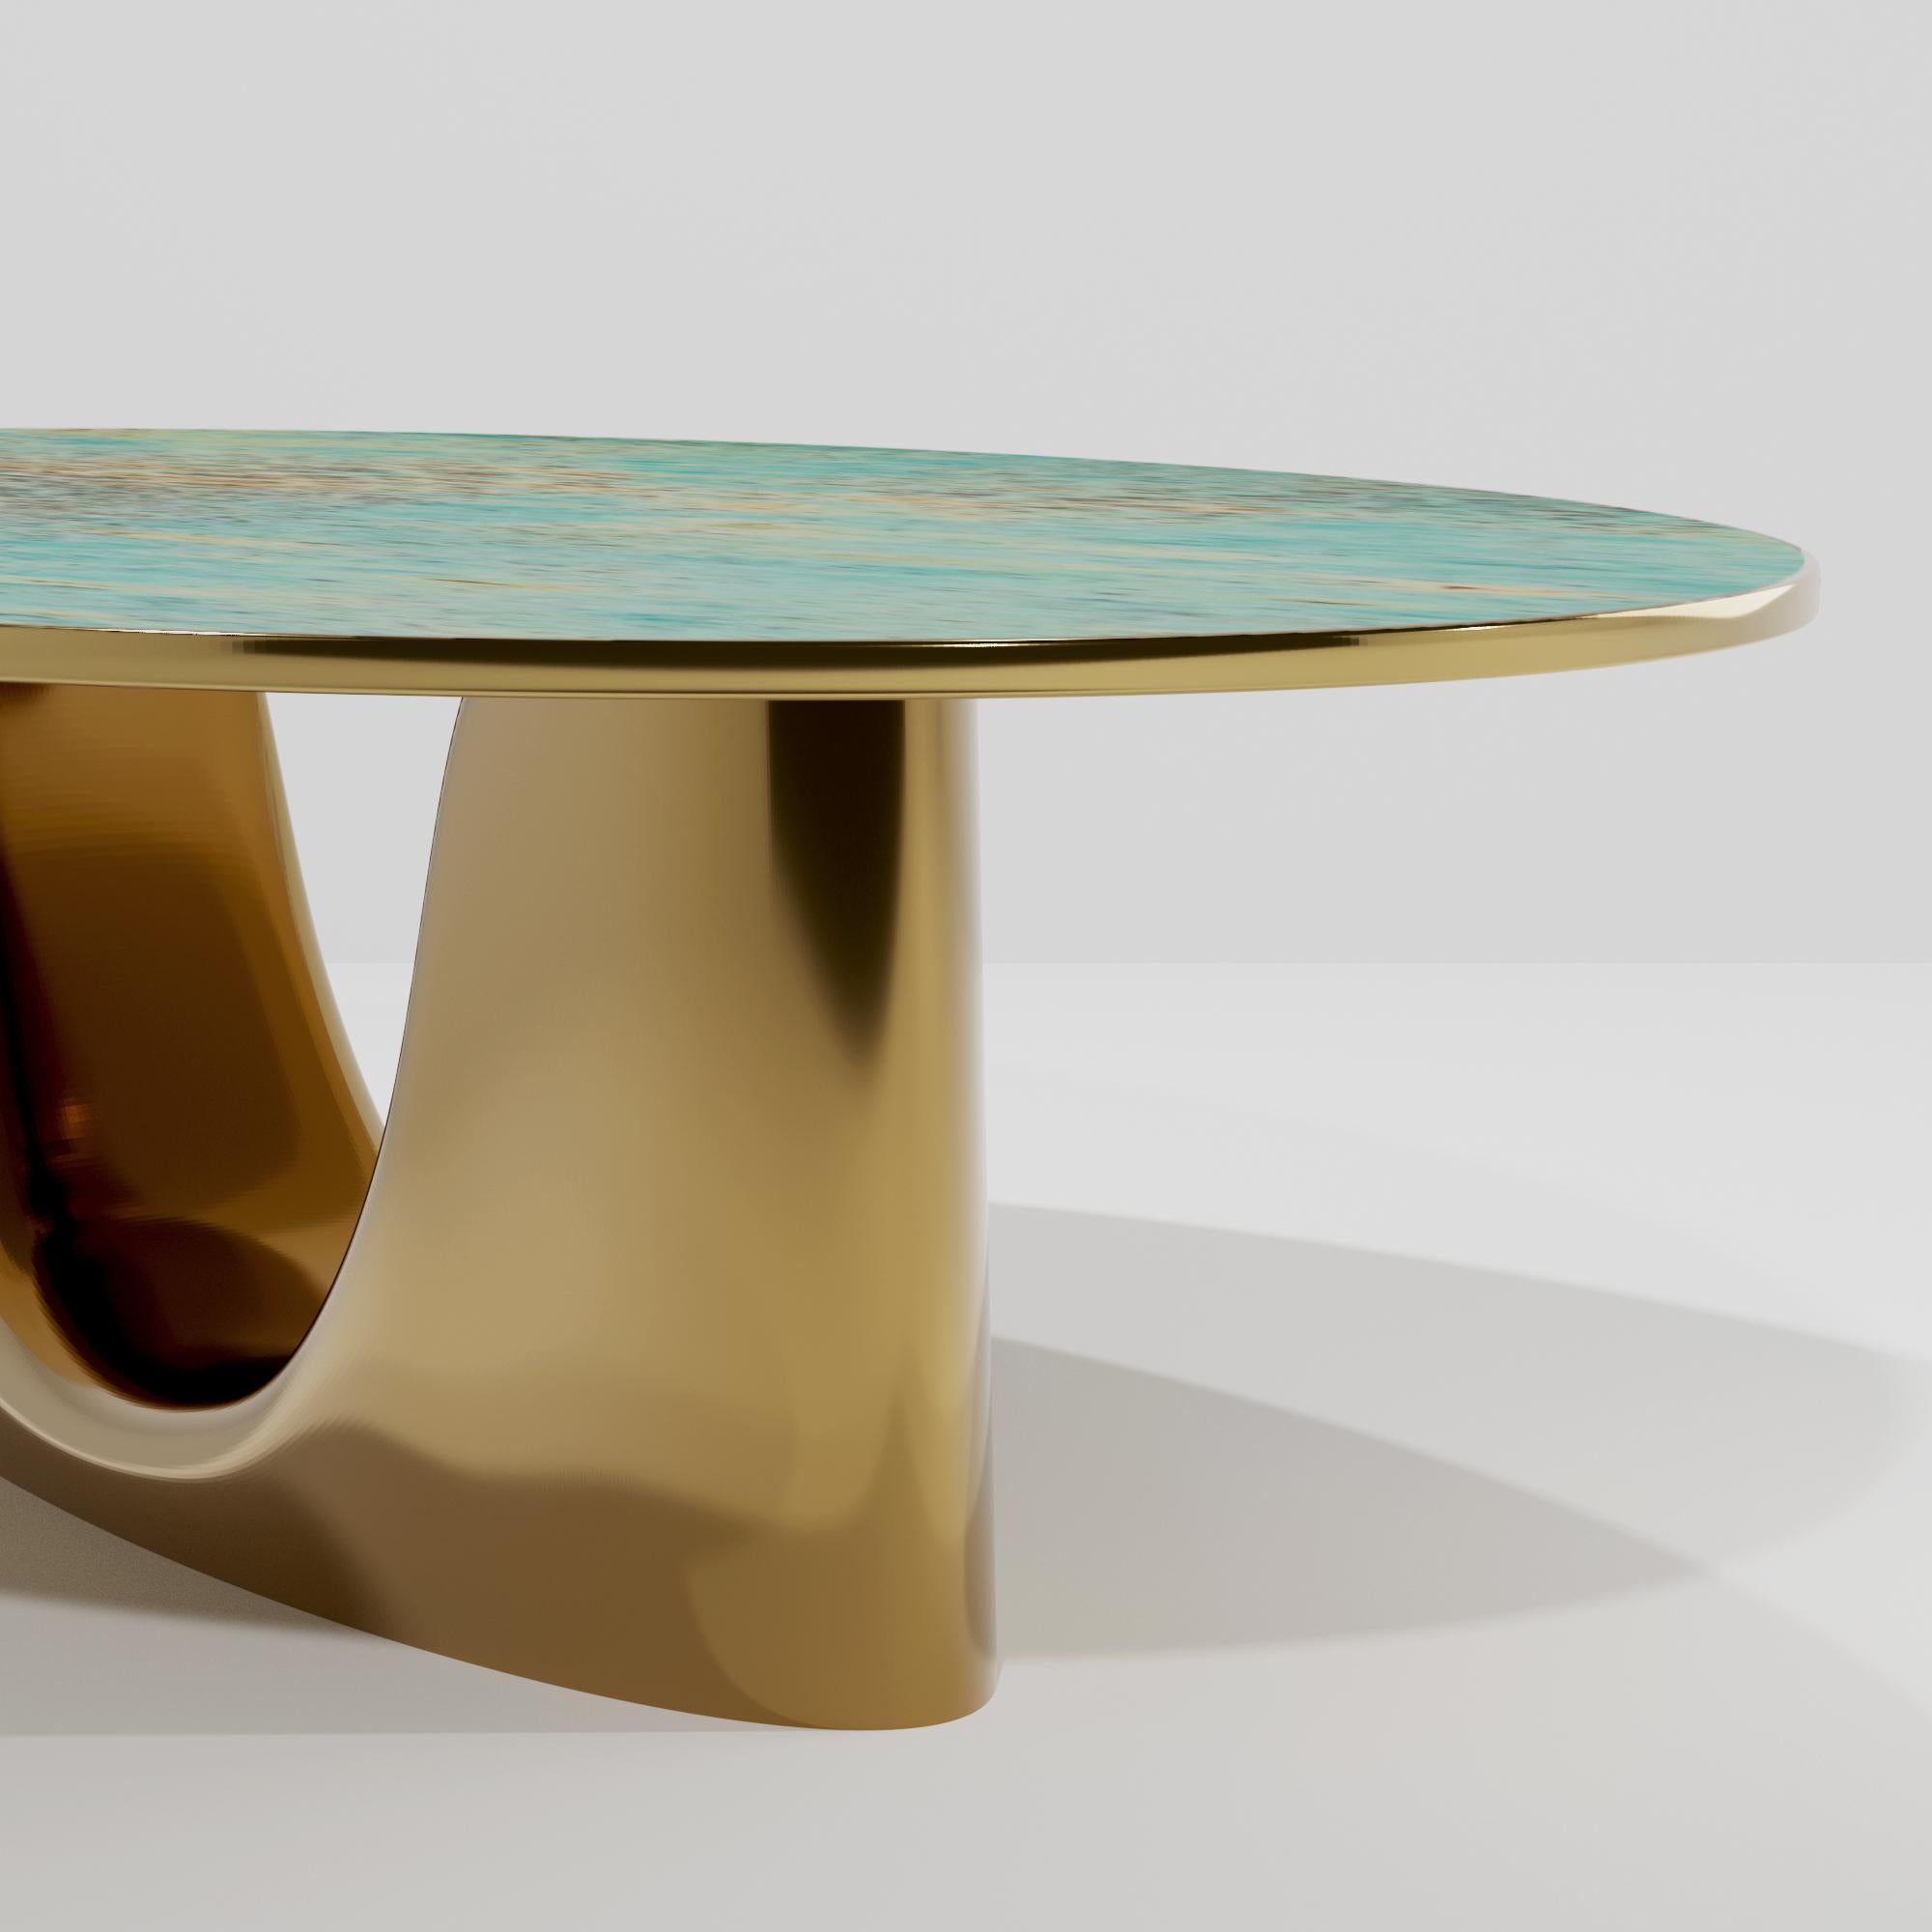 BIS, 21st Century Blue Green Patina Layered Bronzed Dining Table by Studio SORS 3